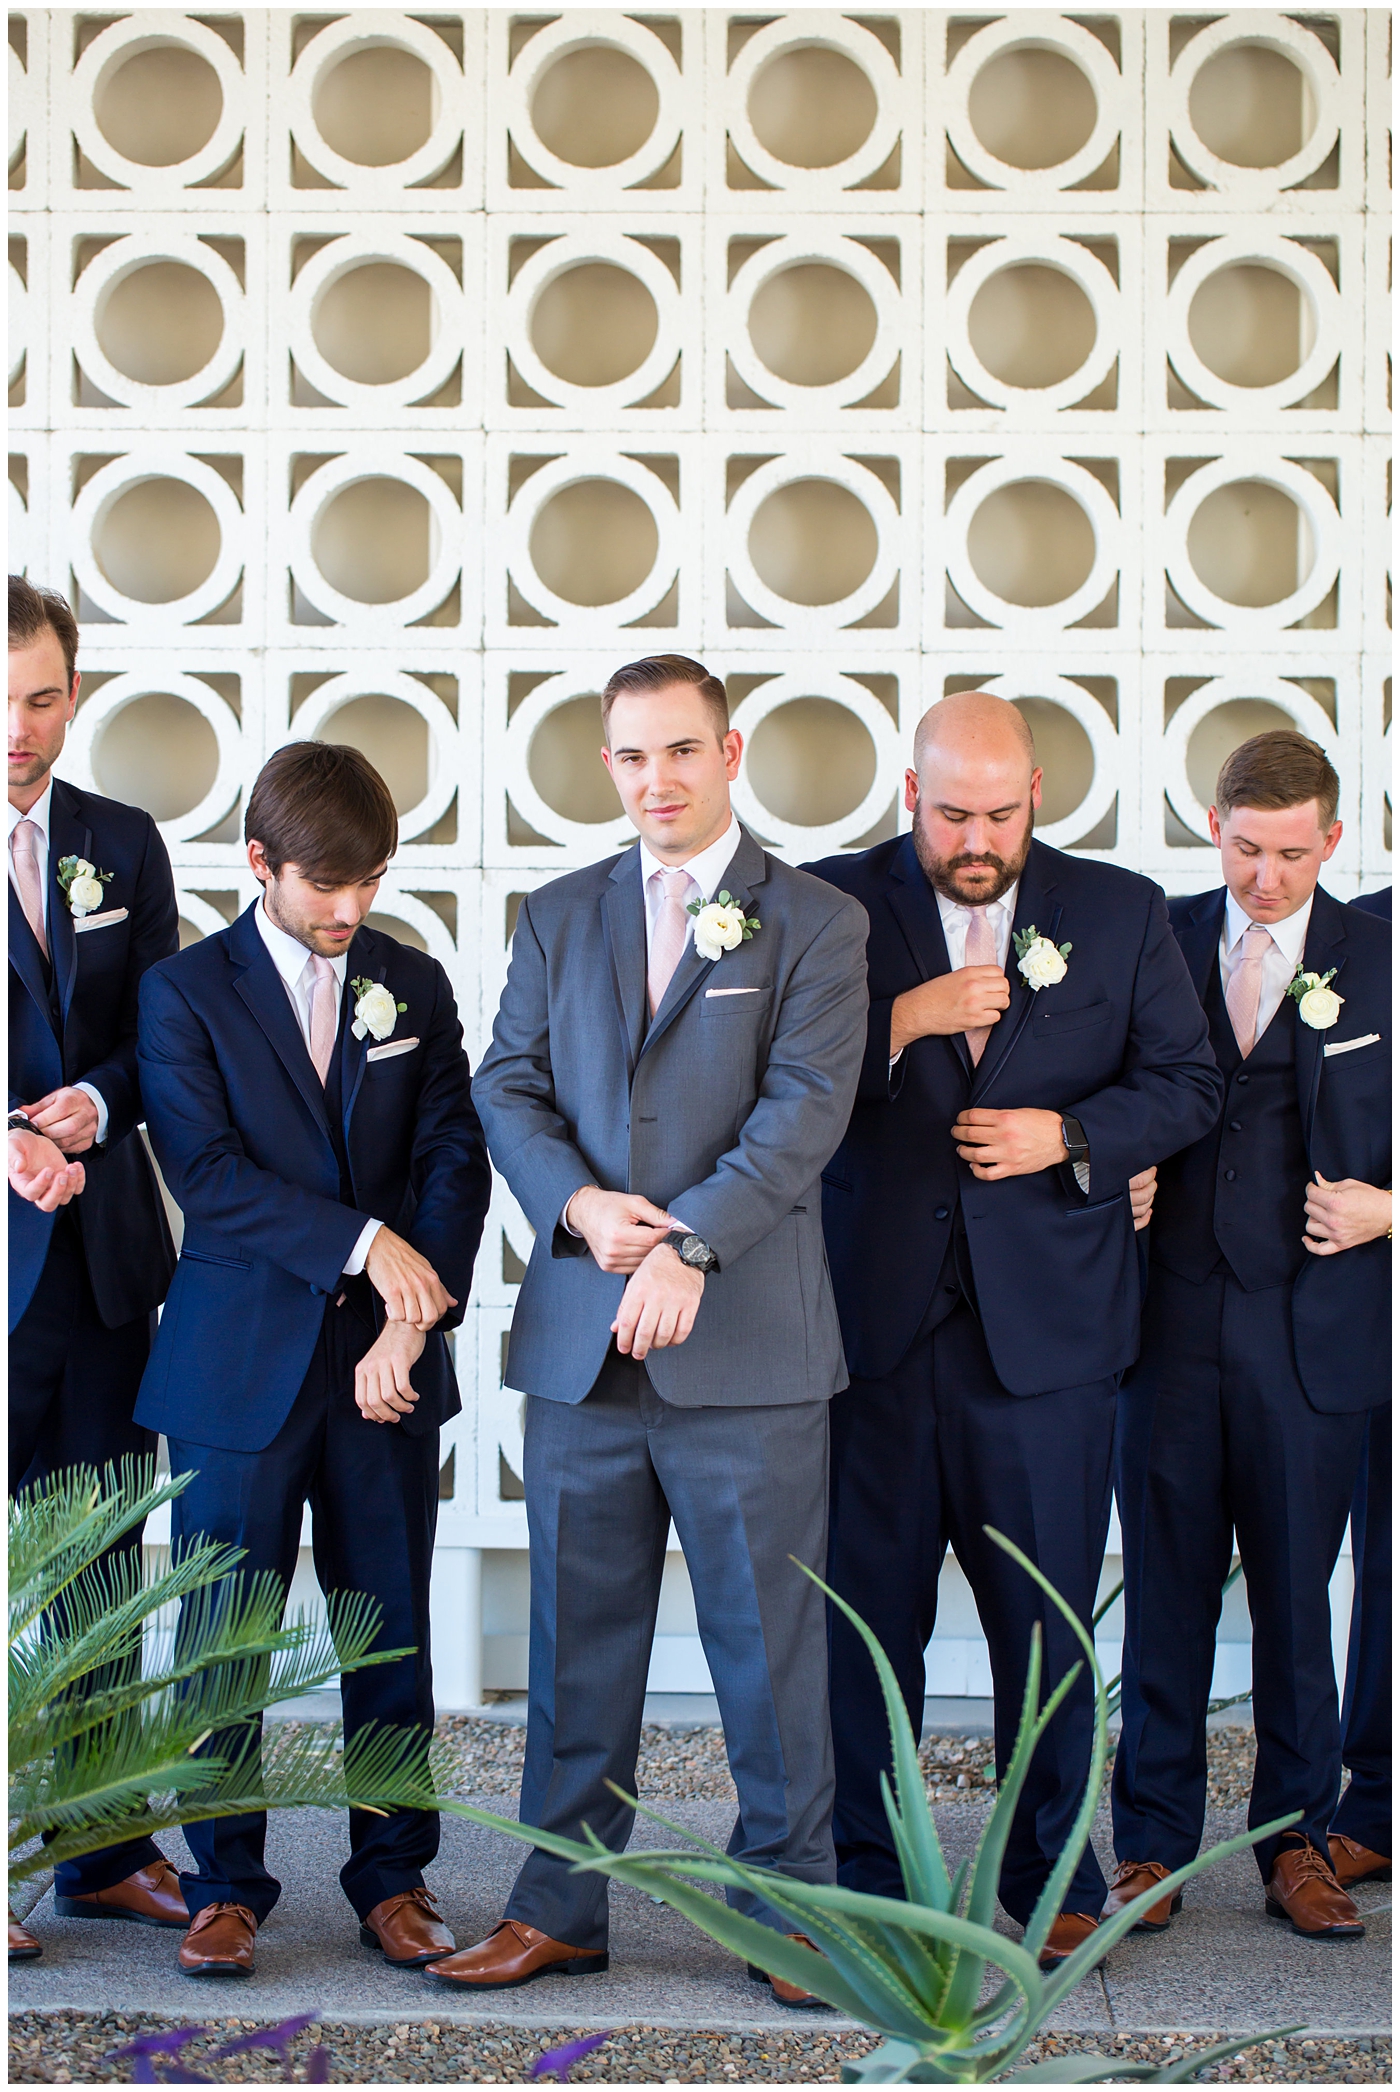 groom in gray suit with pink tie and ranunculus boutonniere and groomsmen in navy suits with pink ties bridal party wedding day portrait